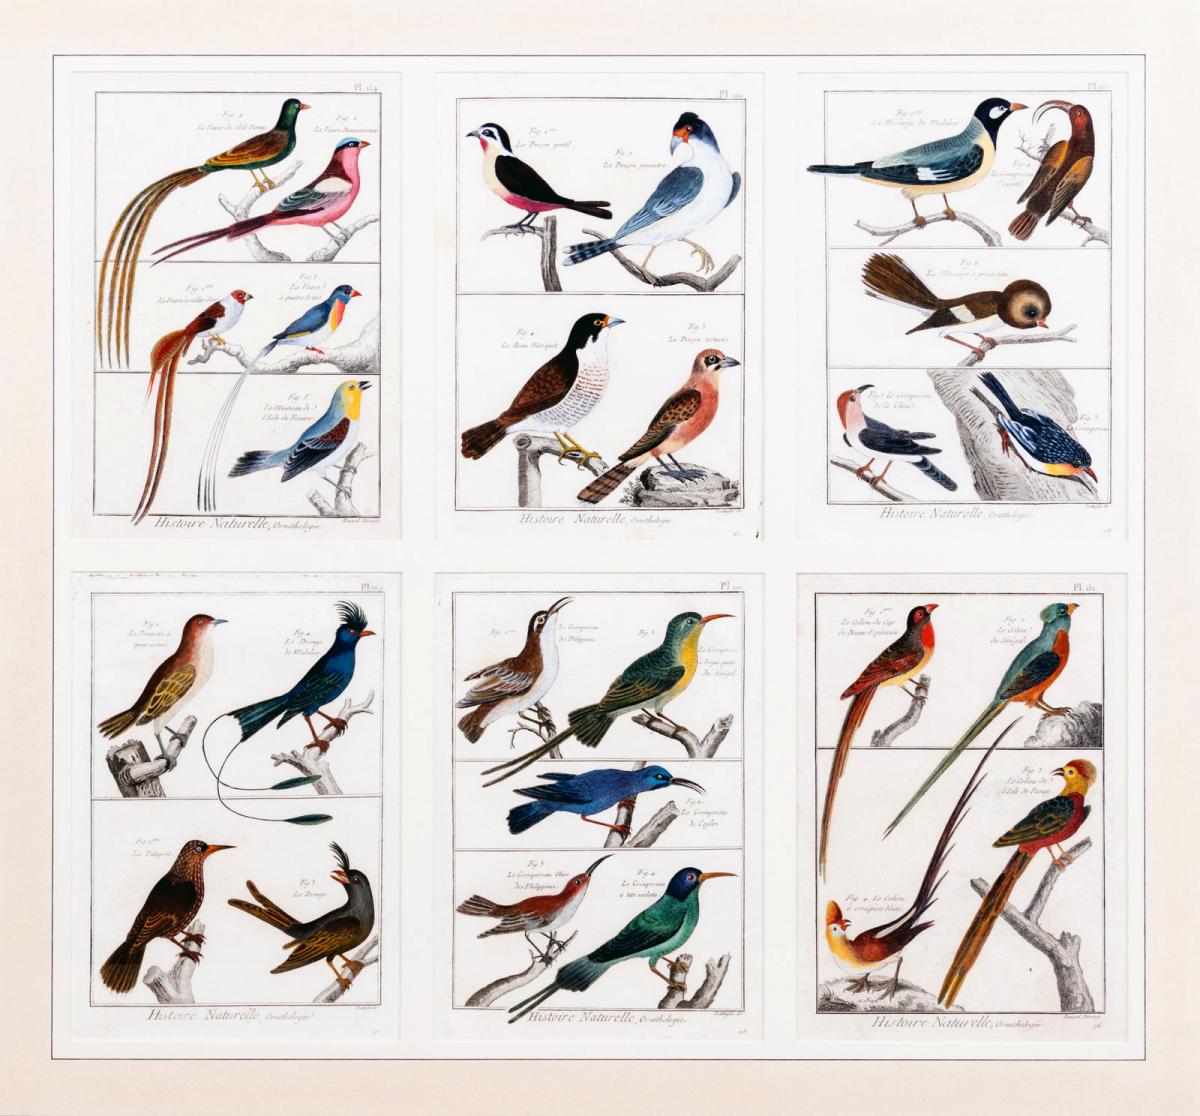 Large Picture containing Six Different Engravings of Grouping of Birds, Histoire Naturelle, Ornithologie by Georges-Louis Leclerc, Comte de Buffon, Circa 1770-83